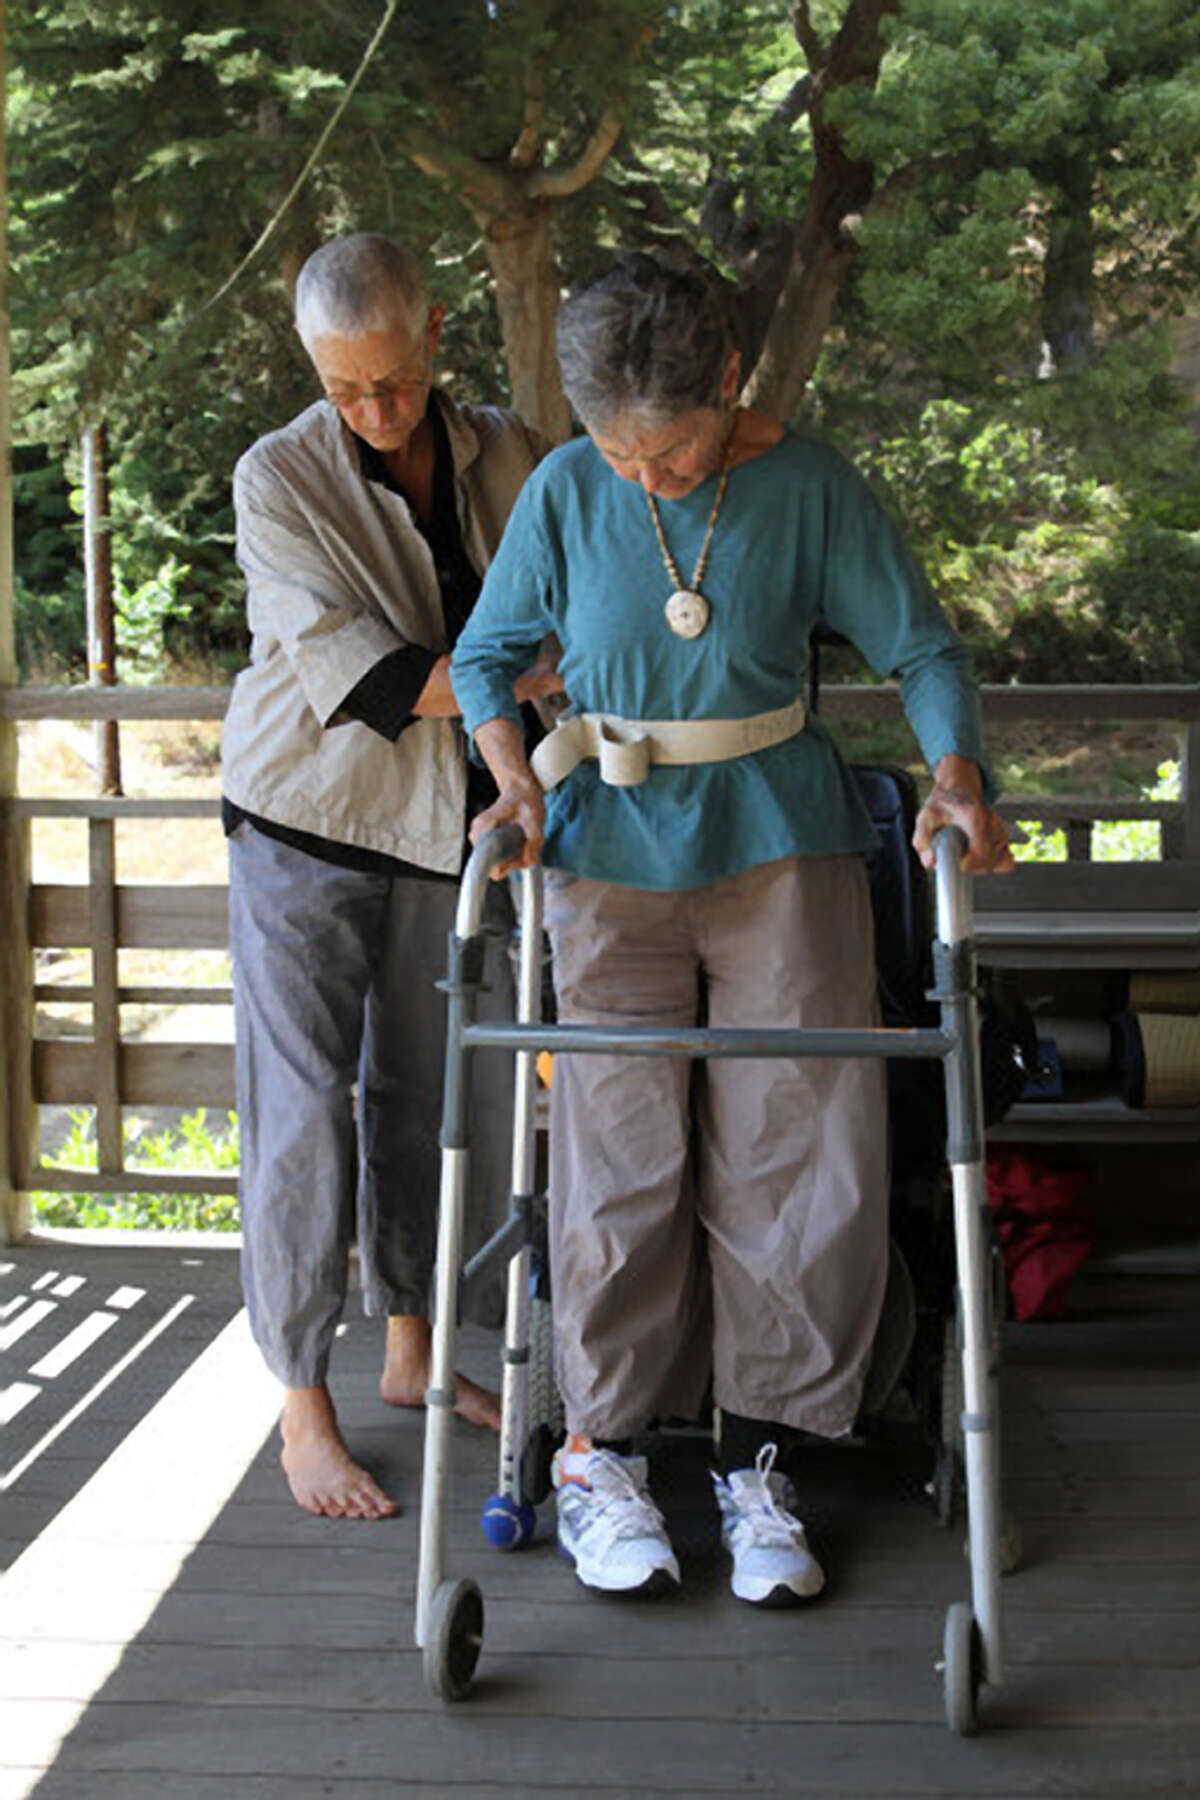 Dr. Grace Dammann performs part of her physical therapy routine with help from partner Fu Schroeder.